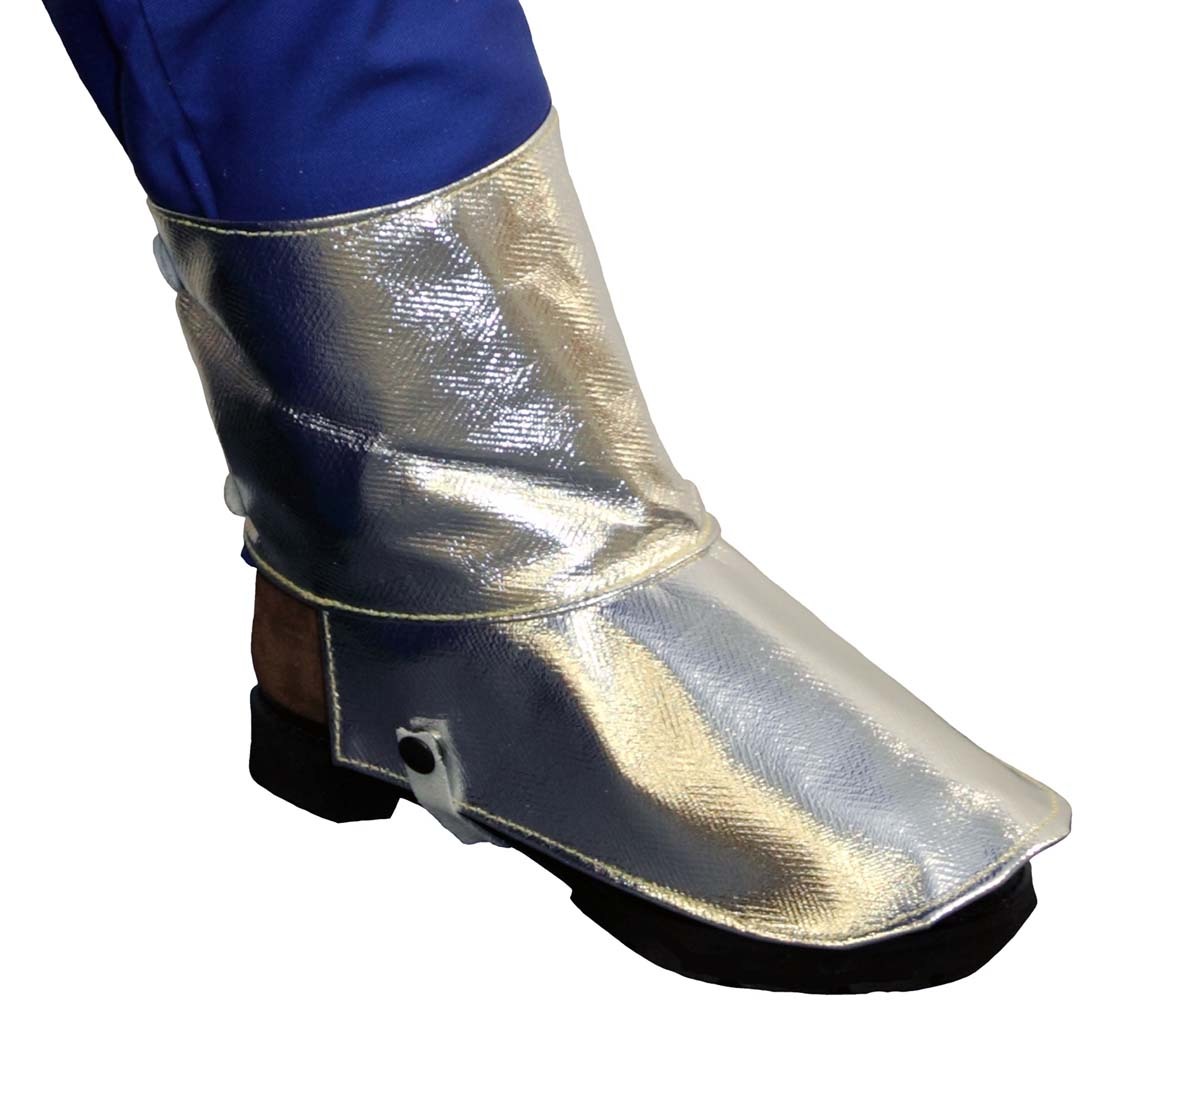 Stanco Safety Products™ One Size Fits Most Silver Aluminized Carbon KEVLAR® Heat Resistant Spats With Velcro Hook And Loop Closu